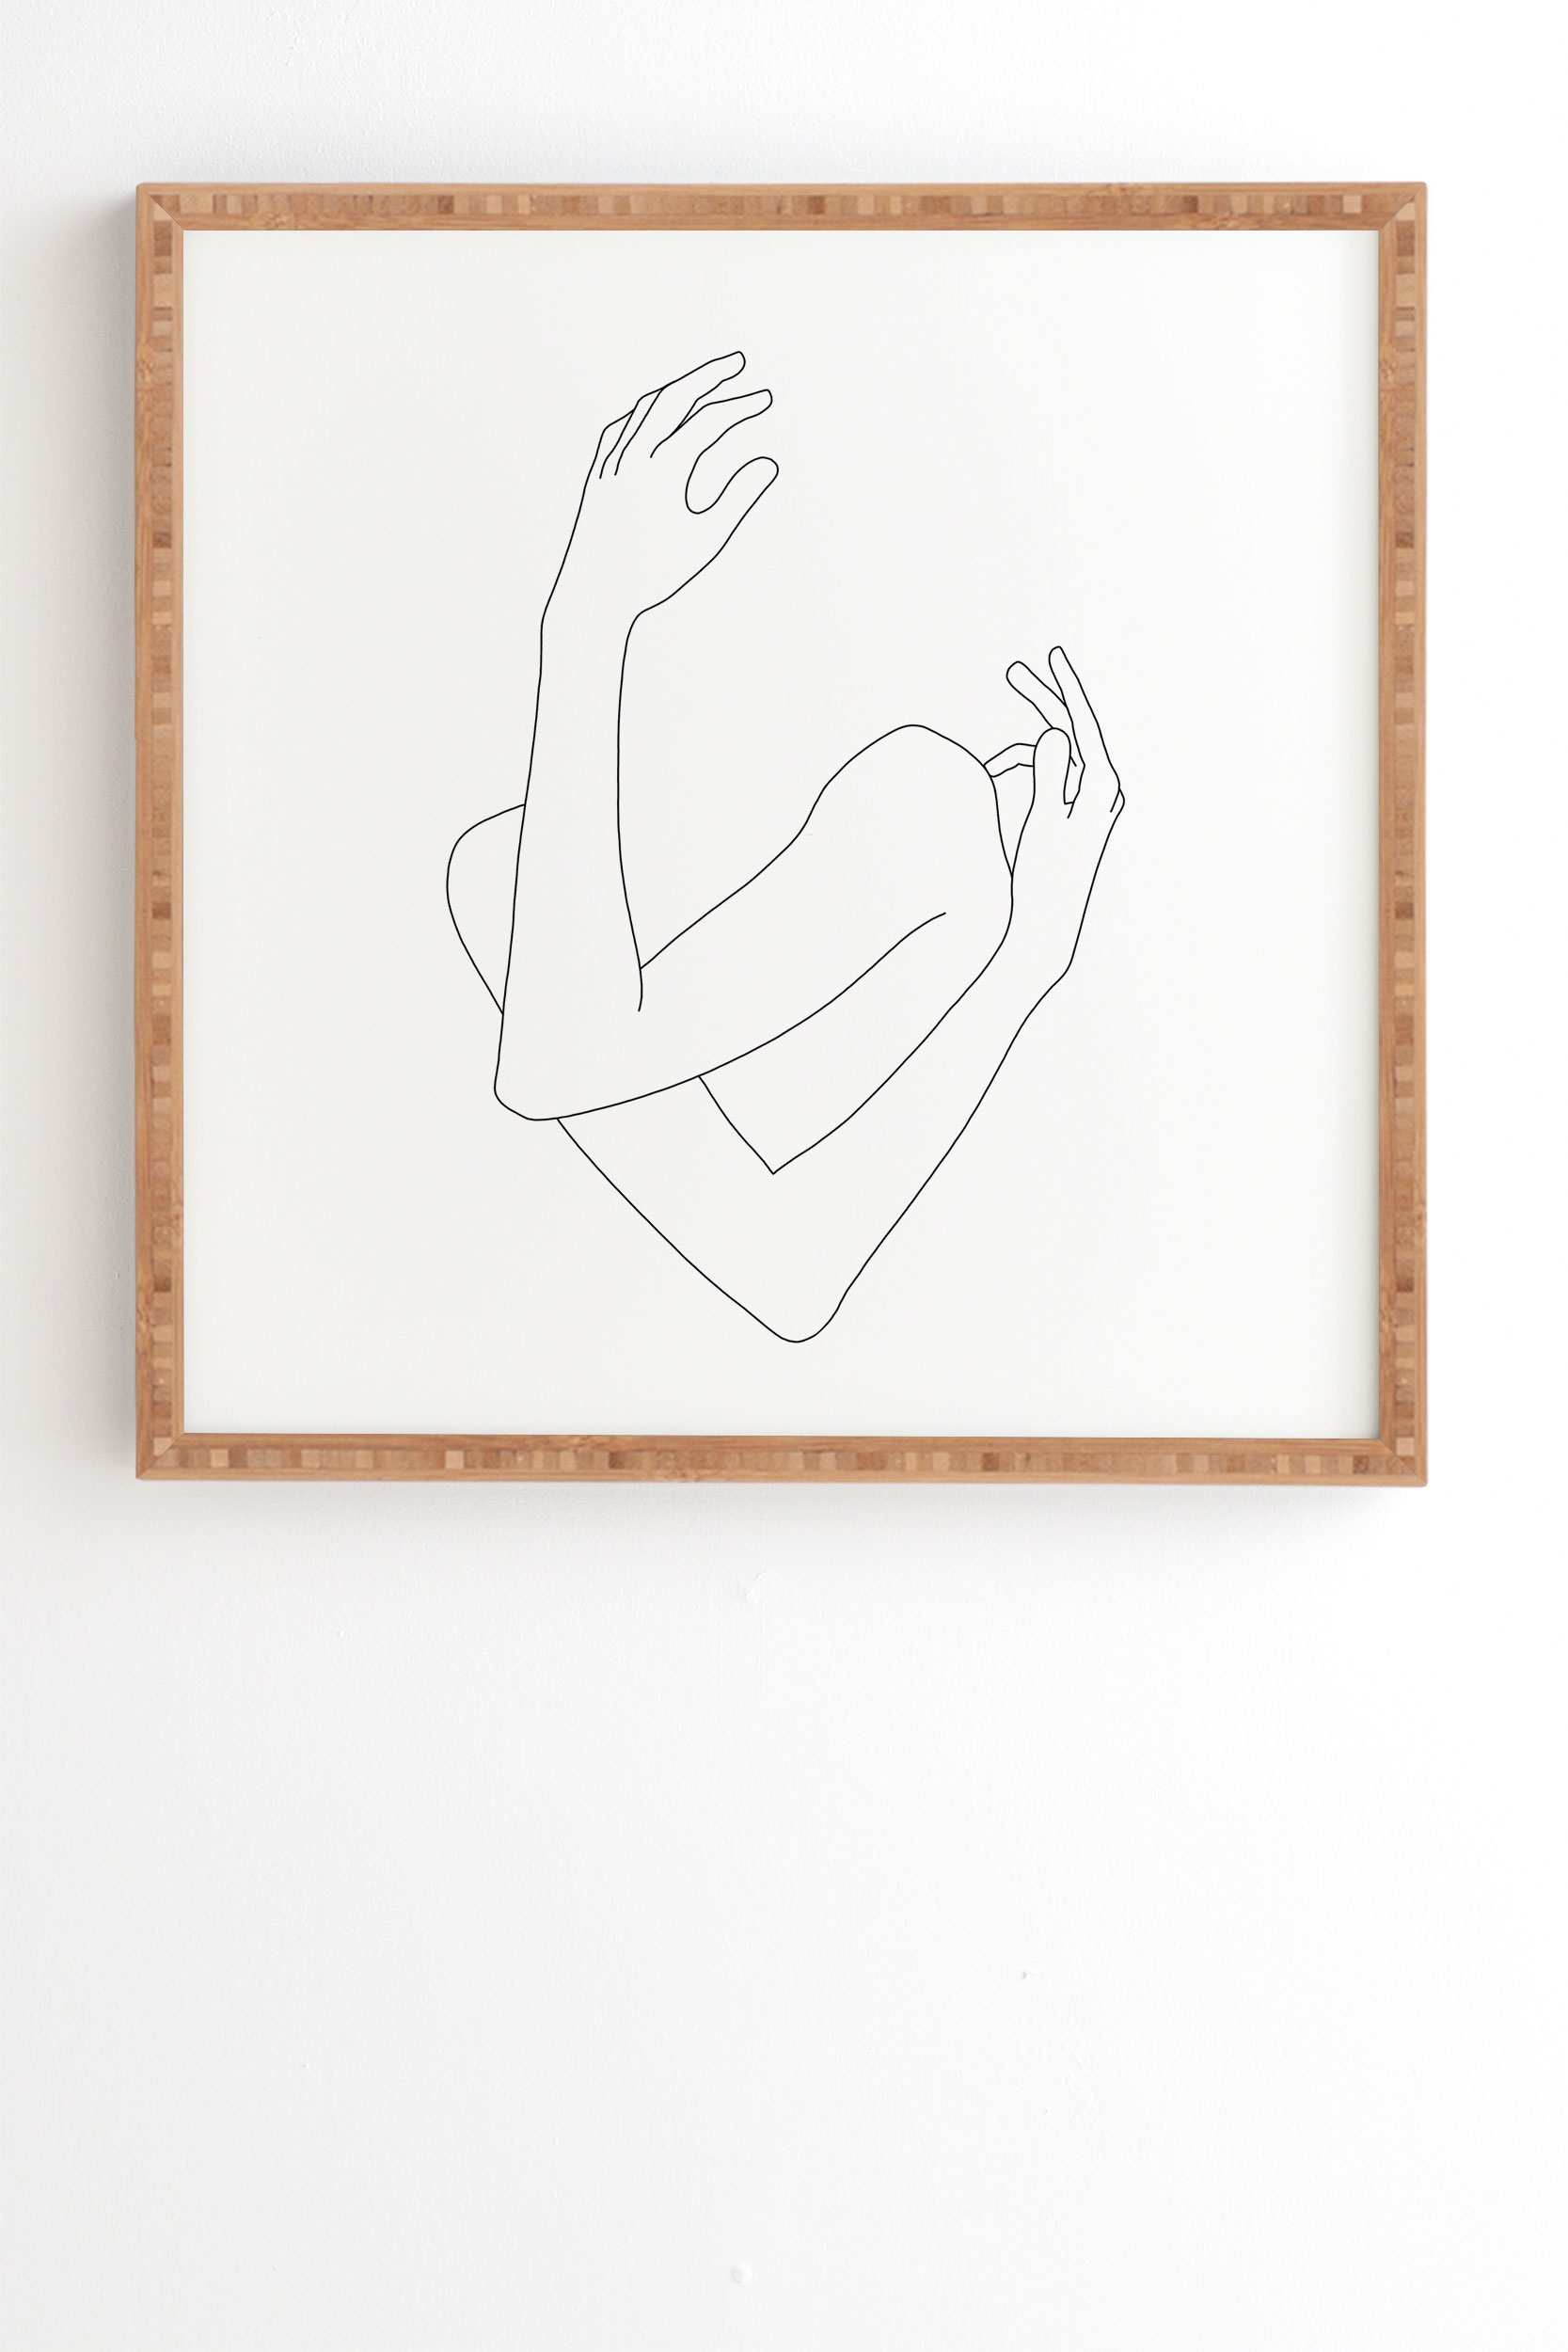 Crossed Arms Illustration Jill by The Colour Study - Framed Wall Art Bamboo 11" x 13" - Image 1